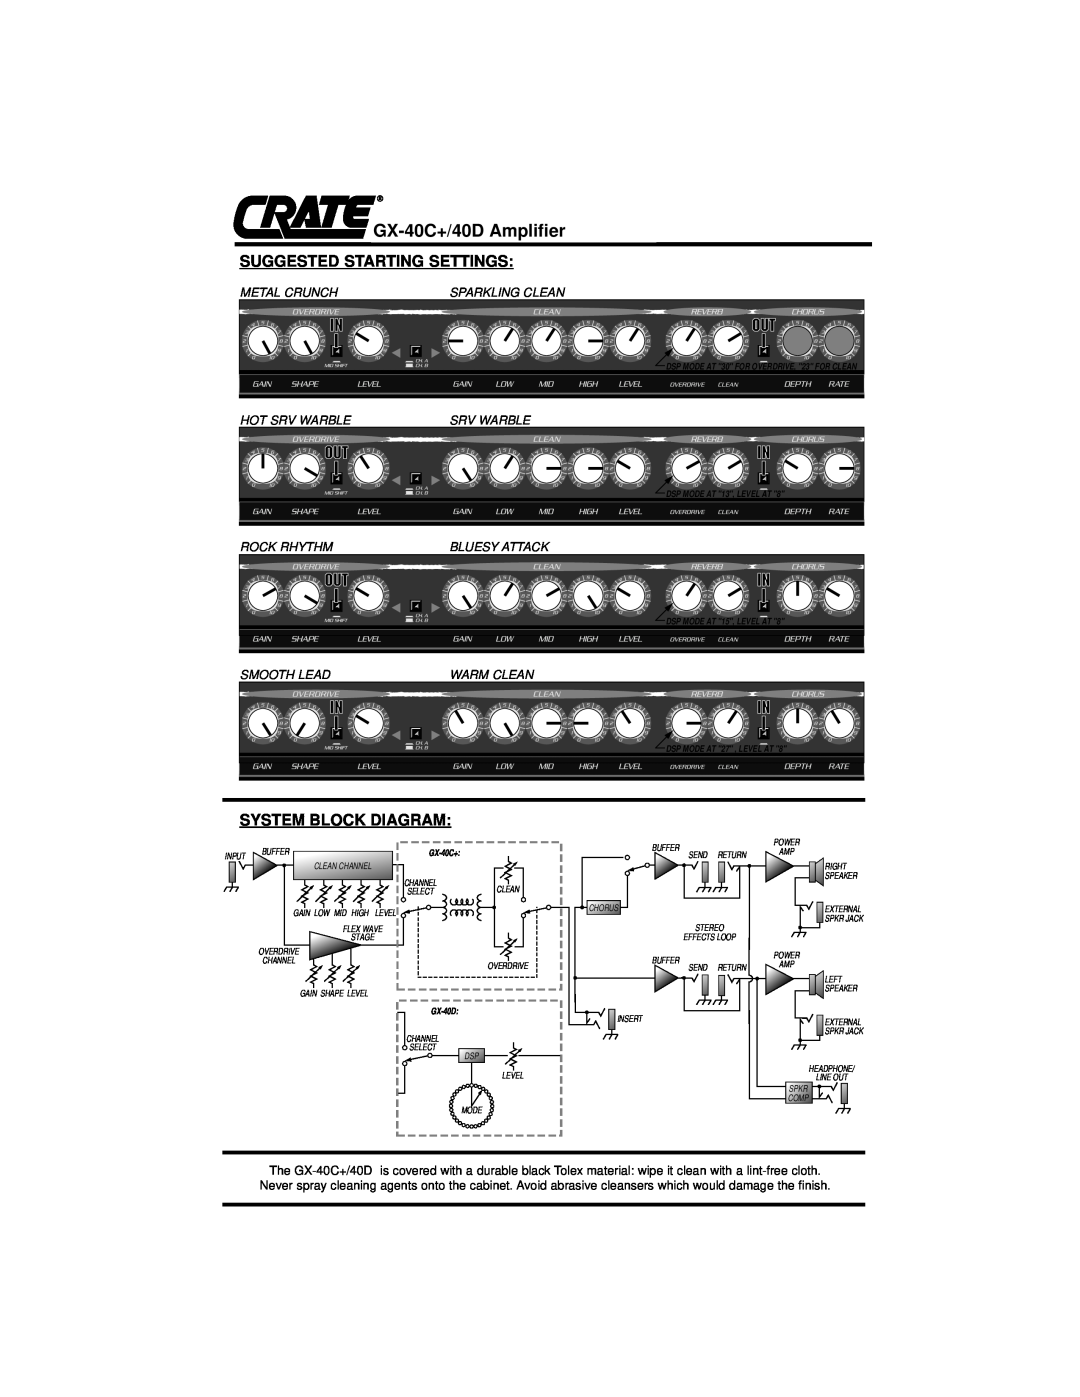 Crate Amplifiers GX-40D Suggested Starting Settings, System Block Diagram, GX-40C+/40DAmplifier, DSP MODE AT 13, LEVEL AT 